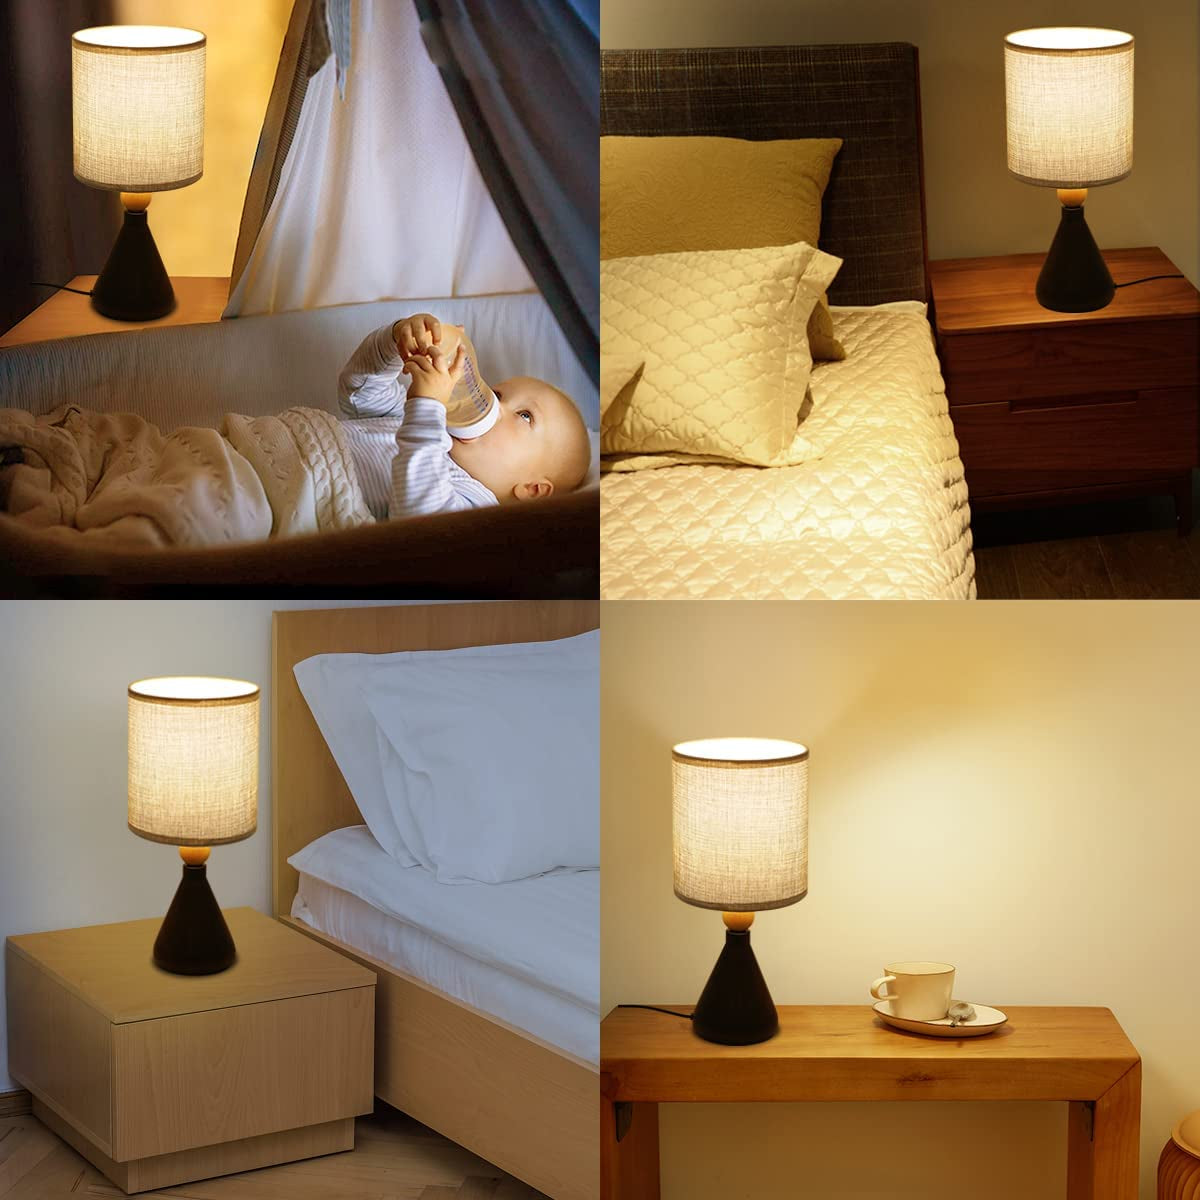 ZEDYOE Dimmable Table Lamp LED Warm White Bedside Lamp,With Gray Fabric Lampshade,E27 Base,For Reading,Bedroom,Living Room,Study,Office(7W Bulb Included)